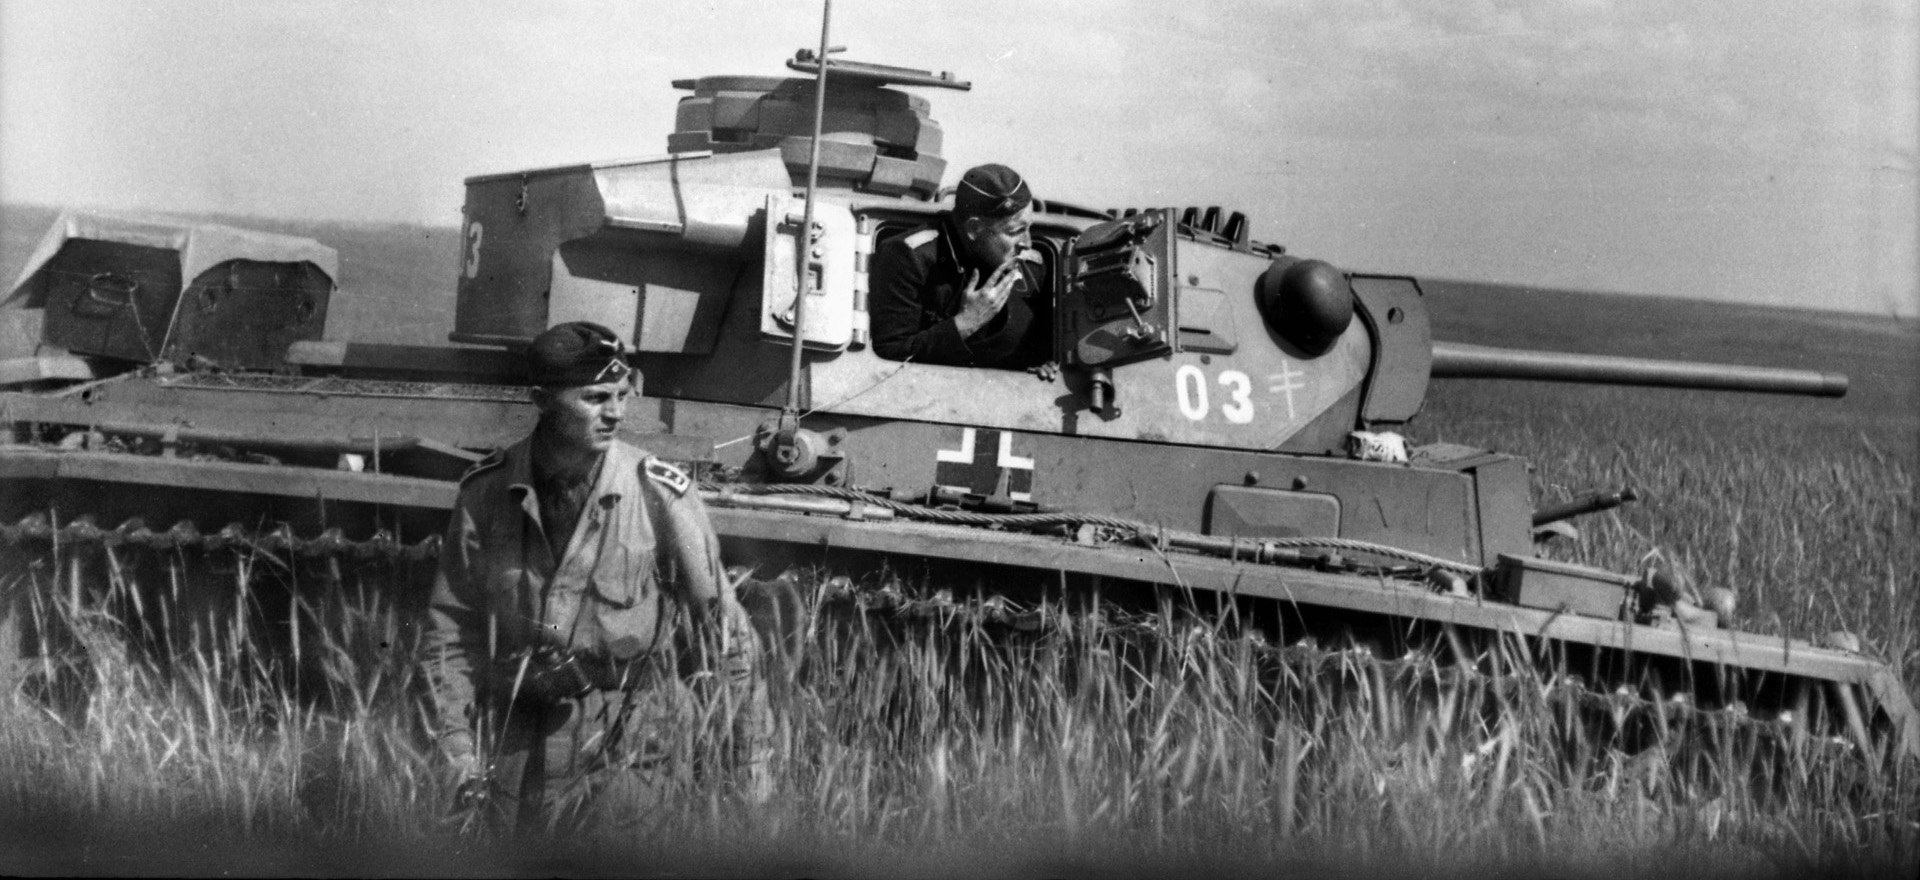 A German tanker stands on the Russian steppe near Voronezh after emerging from the turret of his PzKpfw. III tank. In the summer of 1942, Hitler mounted an armored thrust to the south along the Eastern Front, and it led to ruin.